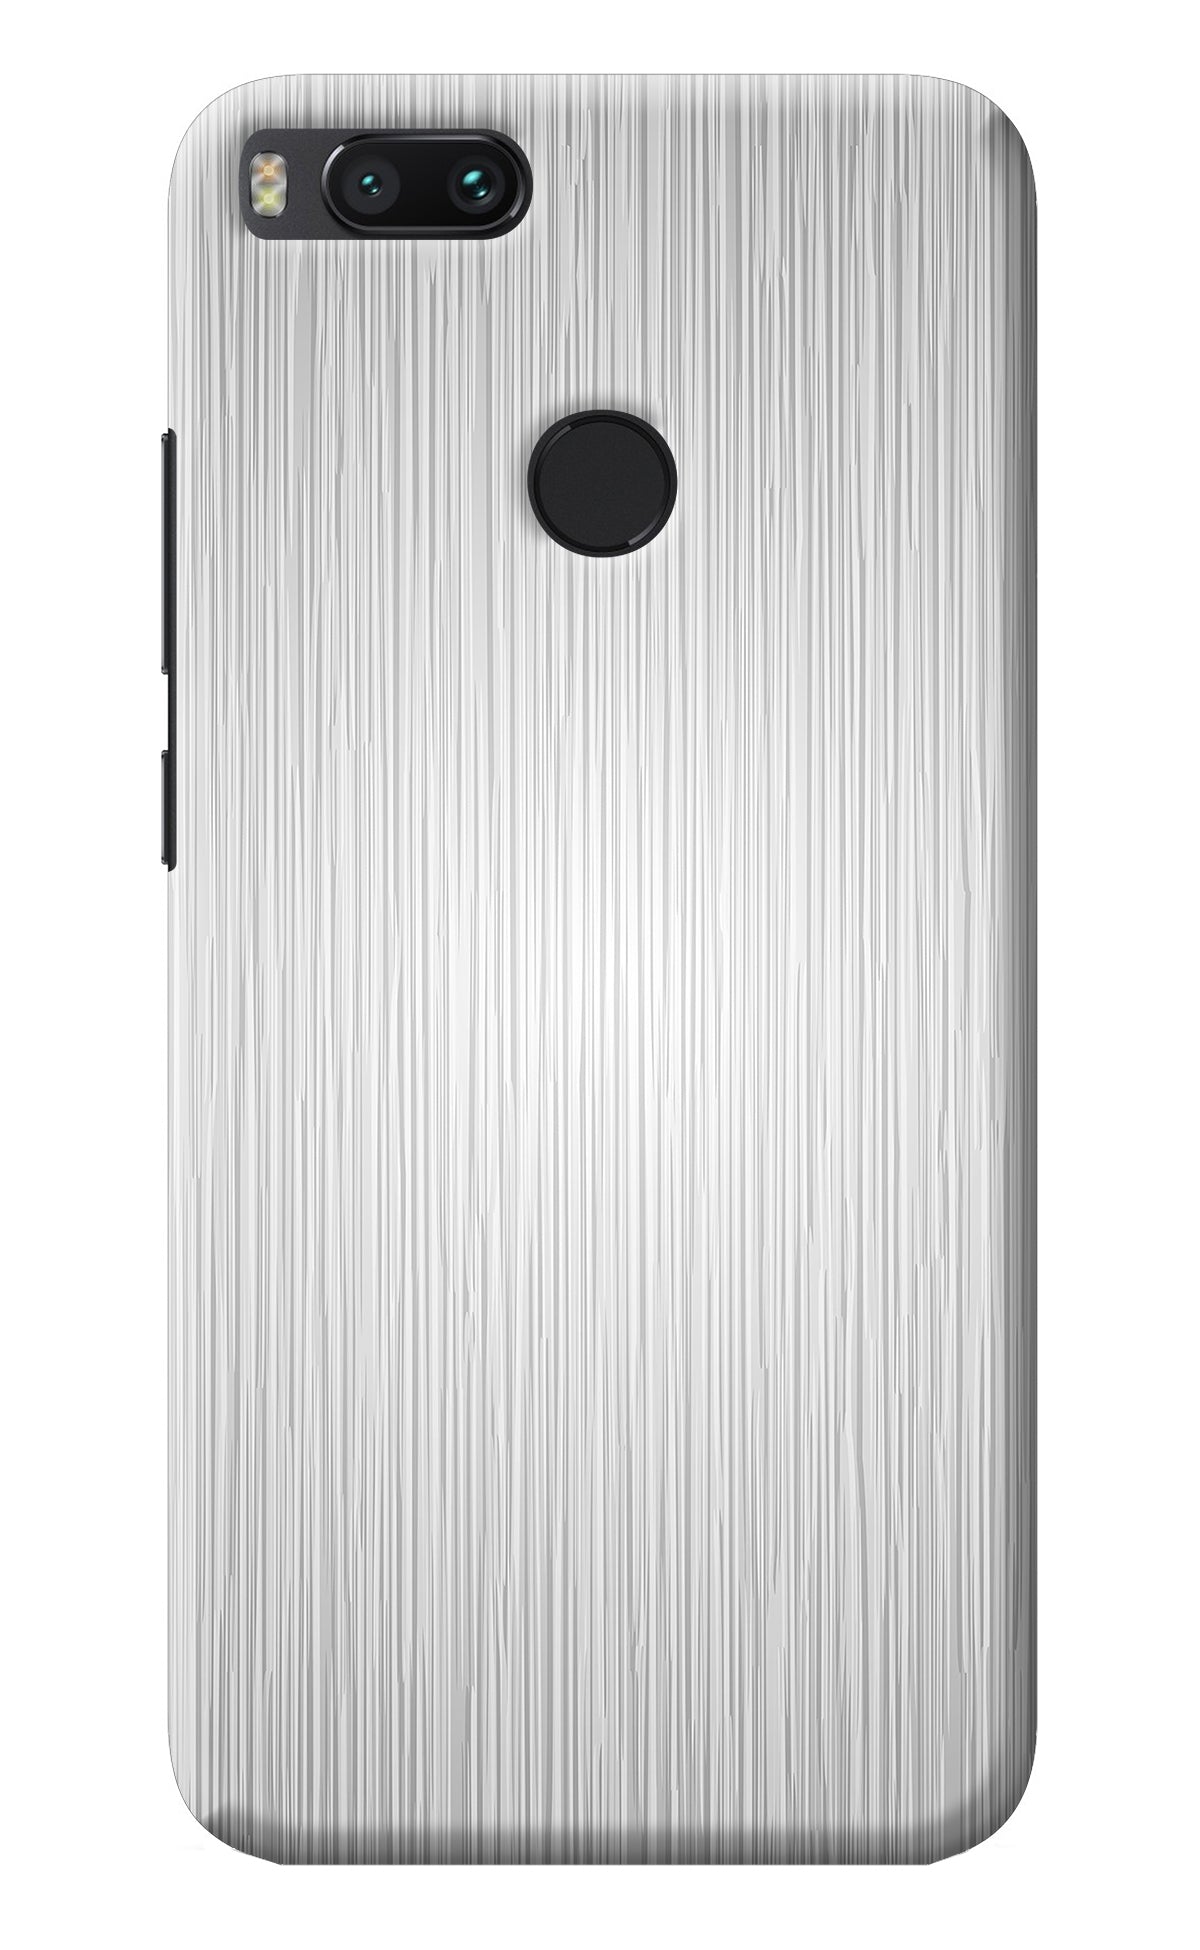 Wooden Grey Texture Mi A1 Back Cover